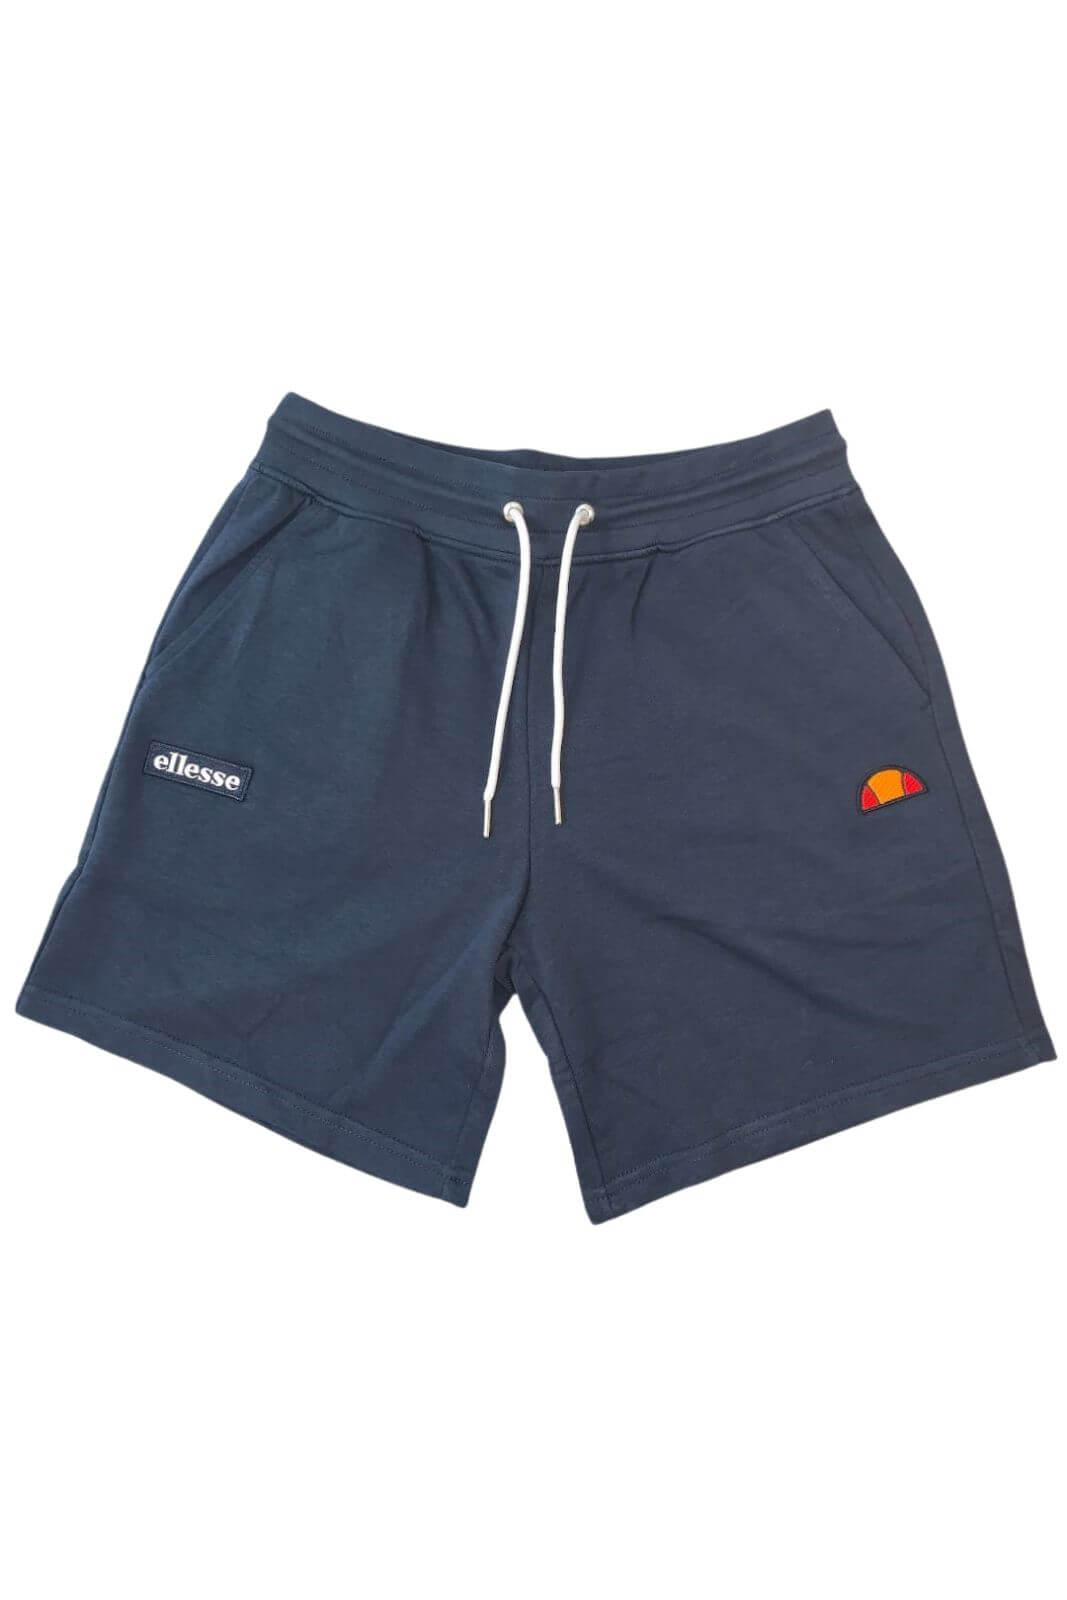 Ellesse Short Bambino con coulisse